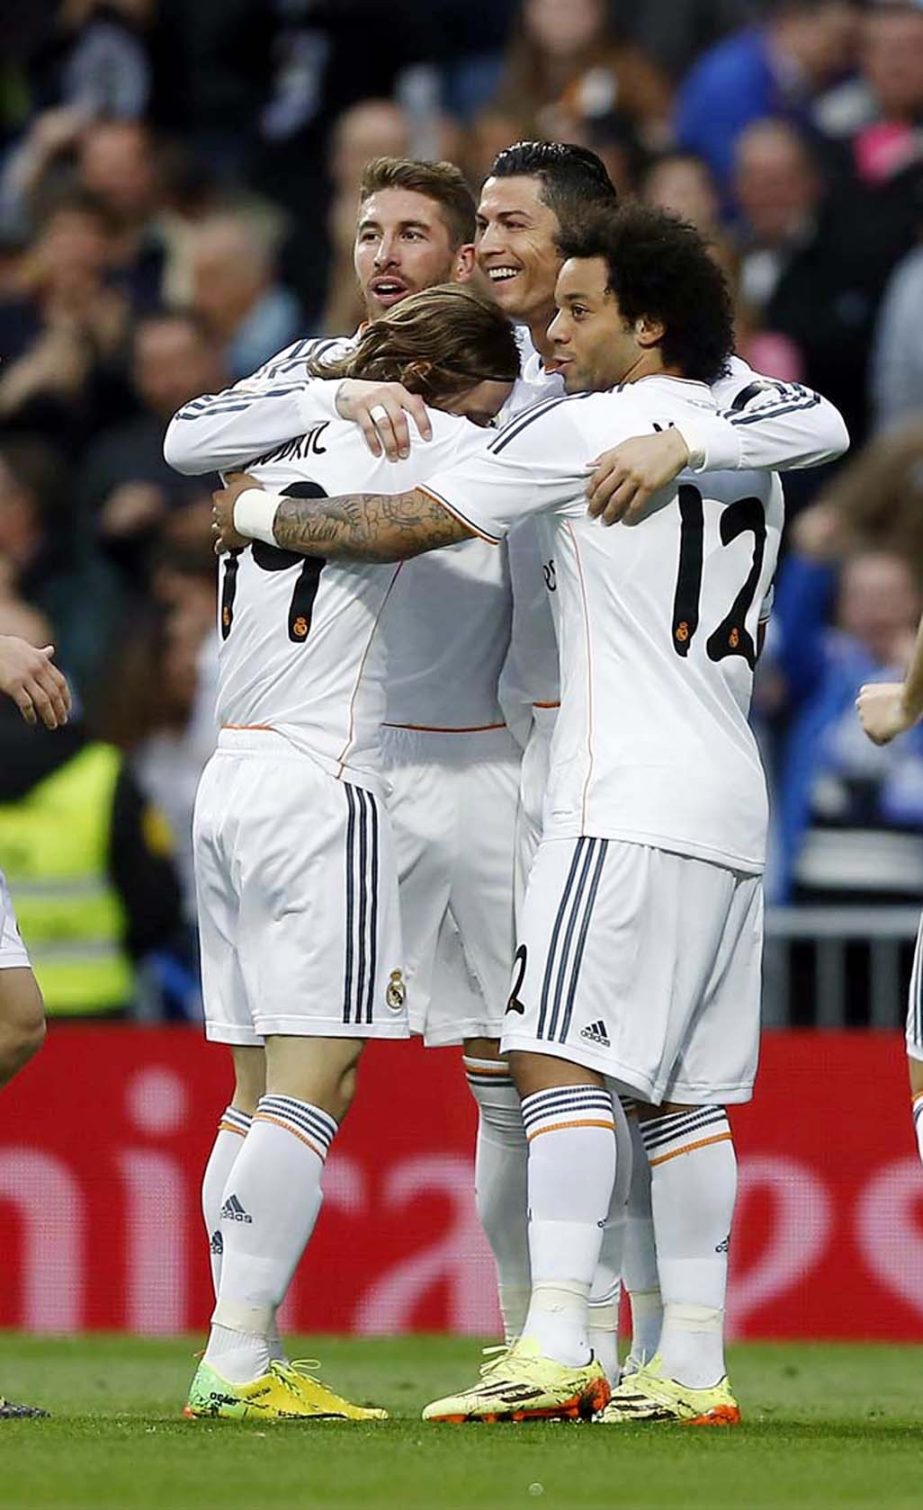 Real's Cristiano Ronaldo (center) celebrates his goal with team mates during a Spanish La Liga soccer match between Real Madrid and Osasuna at the Santiago Bernabeu stadium in Madrid, Spain on Saturday.